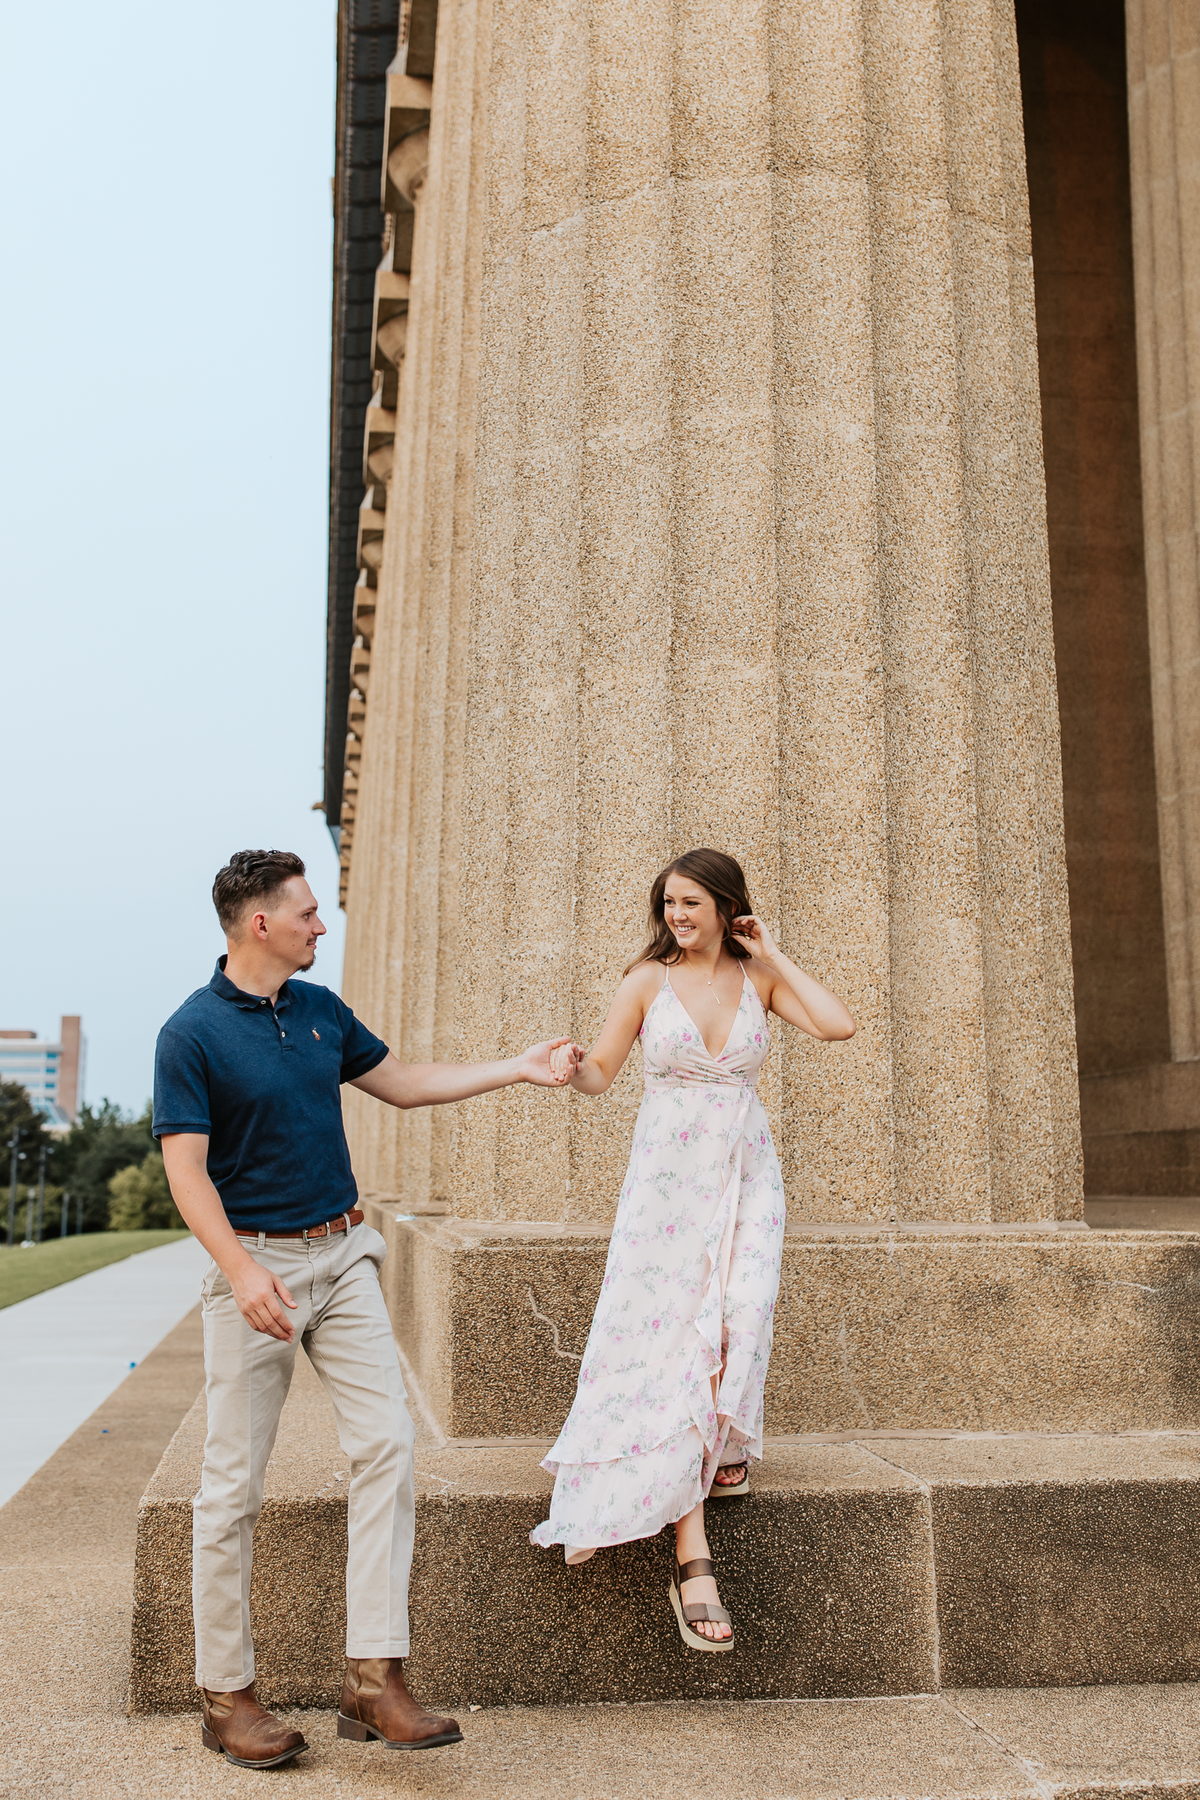 Nashville Pedestrian Bridge and Centenniel Park Engagement Session | Nashville, TN | Carly Crawford Photography | Knoxville and Tennessee Wedding, Couples, and Portrait Photographer-287325